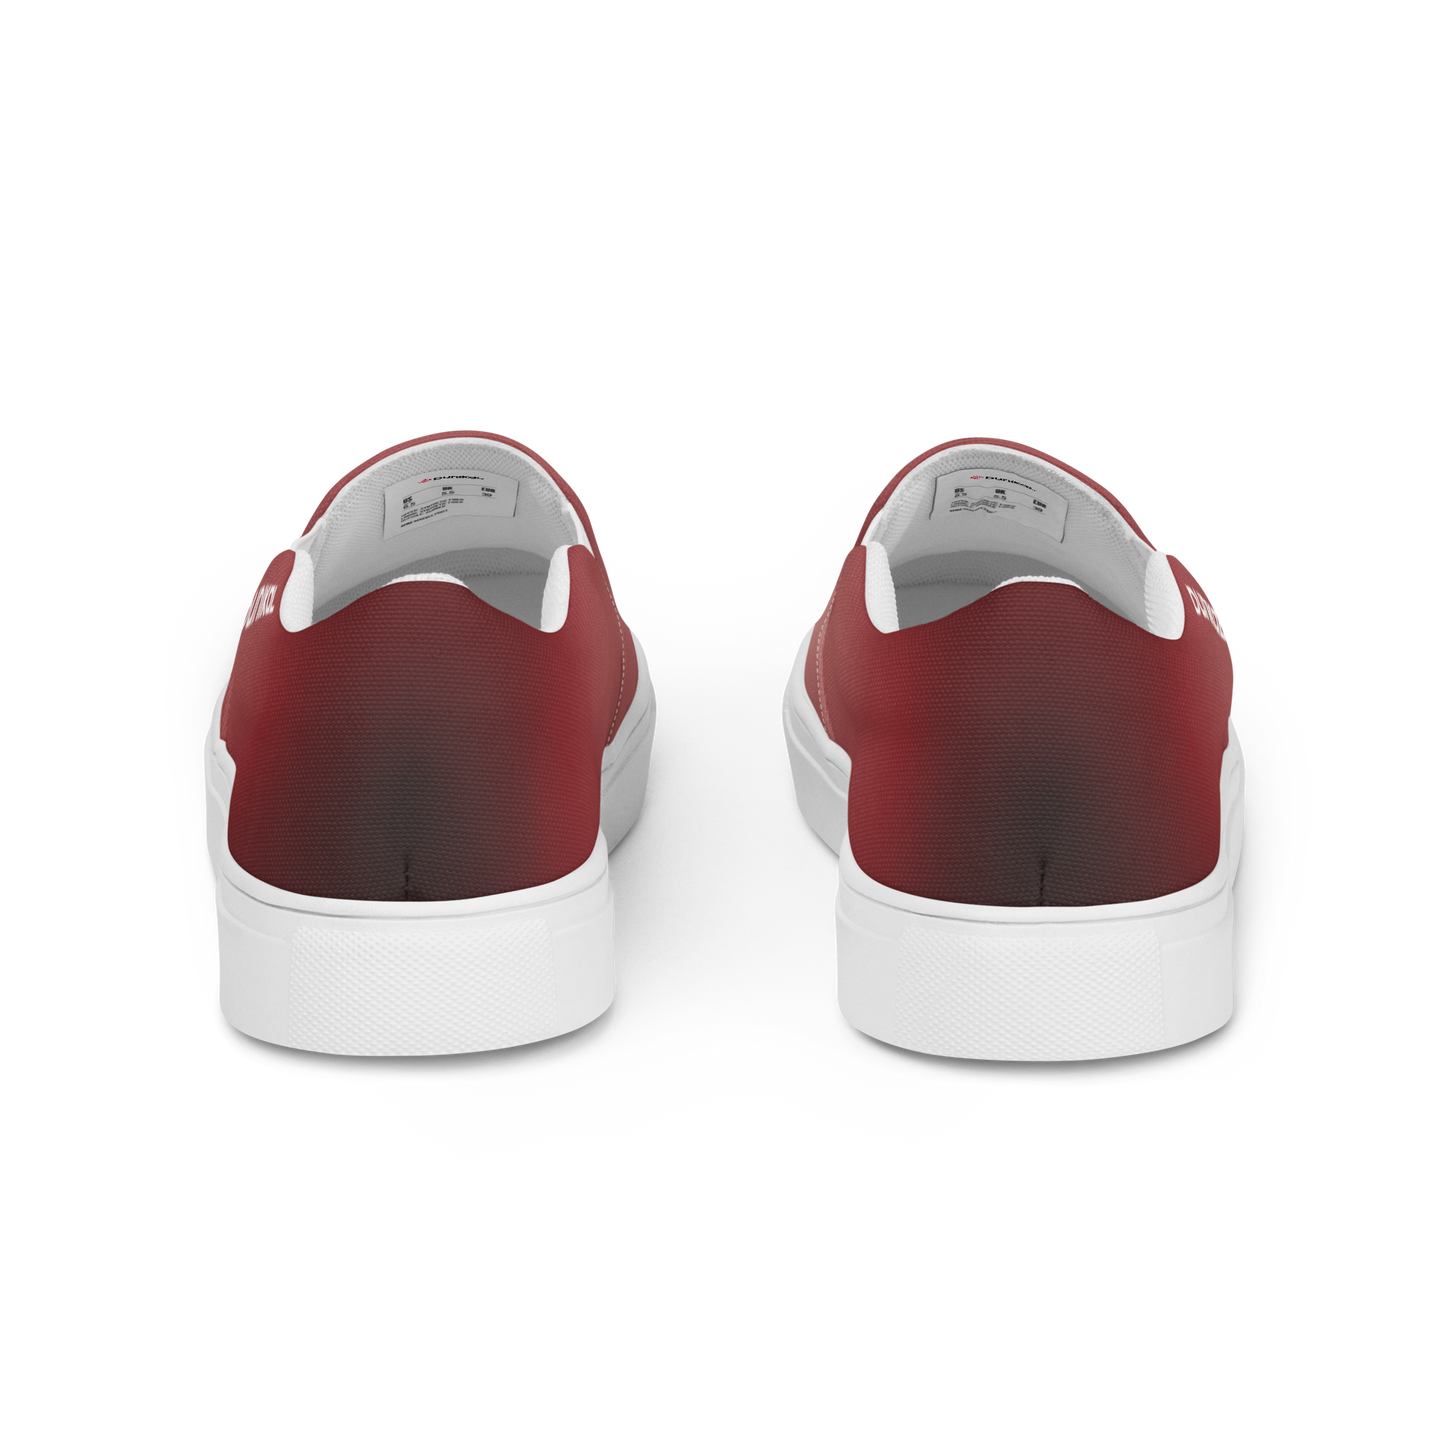 Women's Canvas Slip-Ons ❯ Pure Gradient ❯ Ruby Red